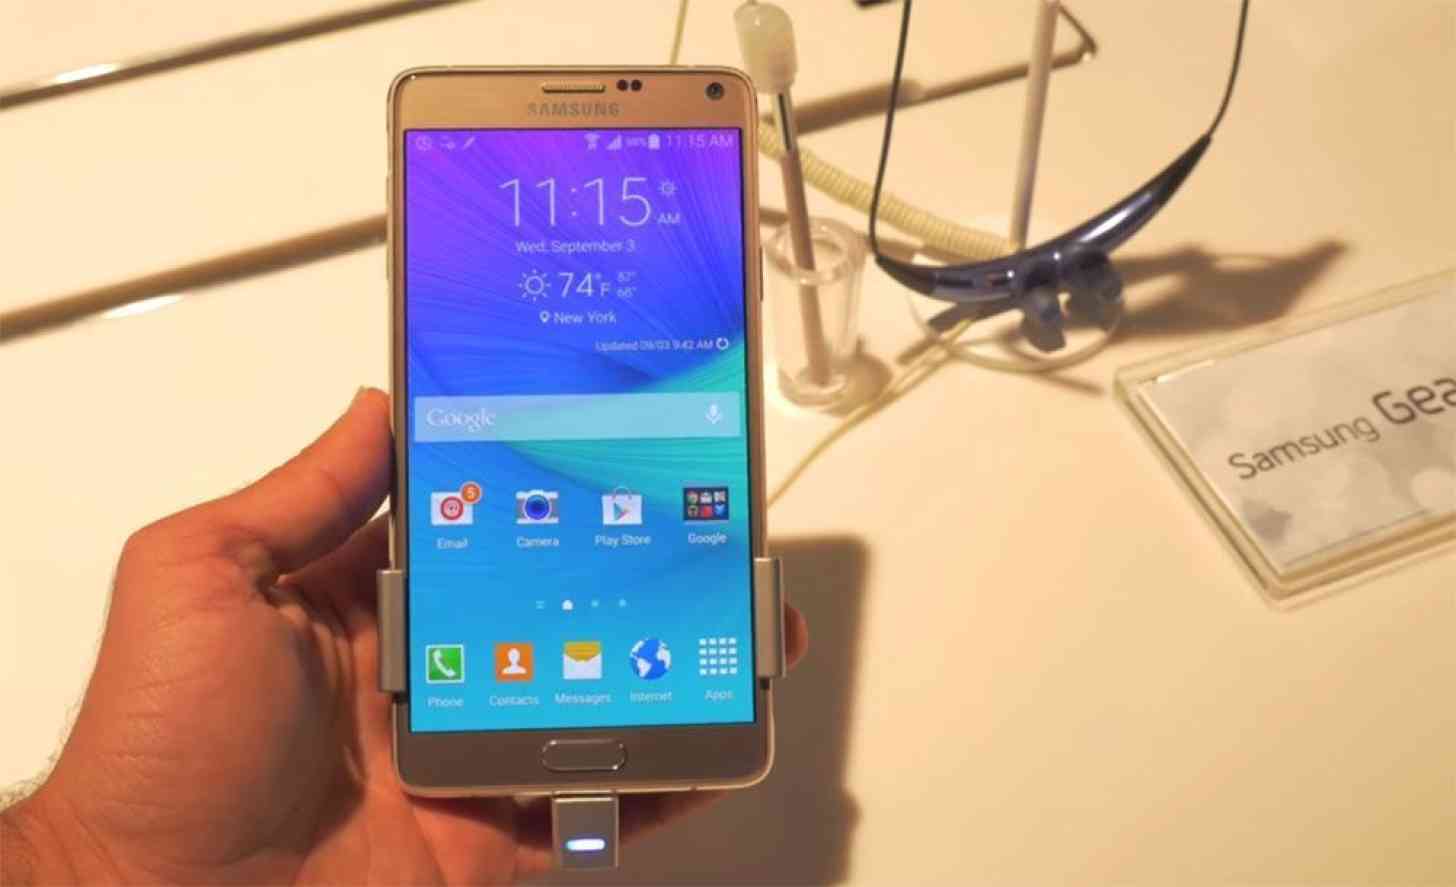 Samsung Galaxy Note 4 hands on video